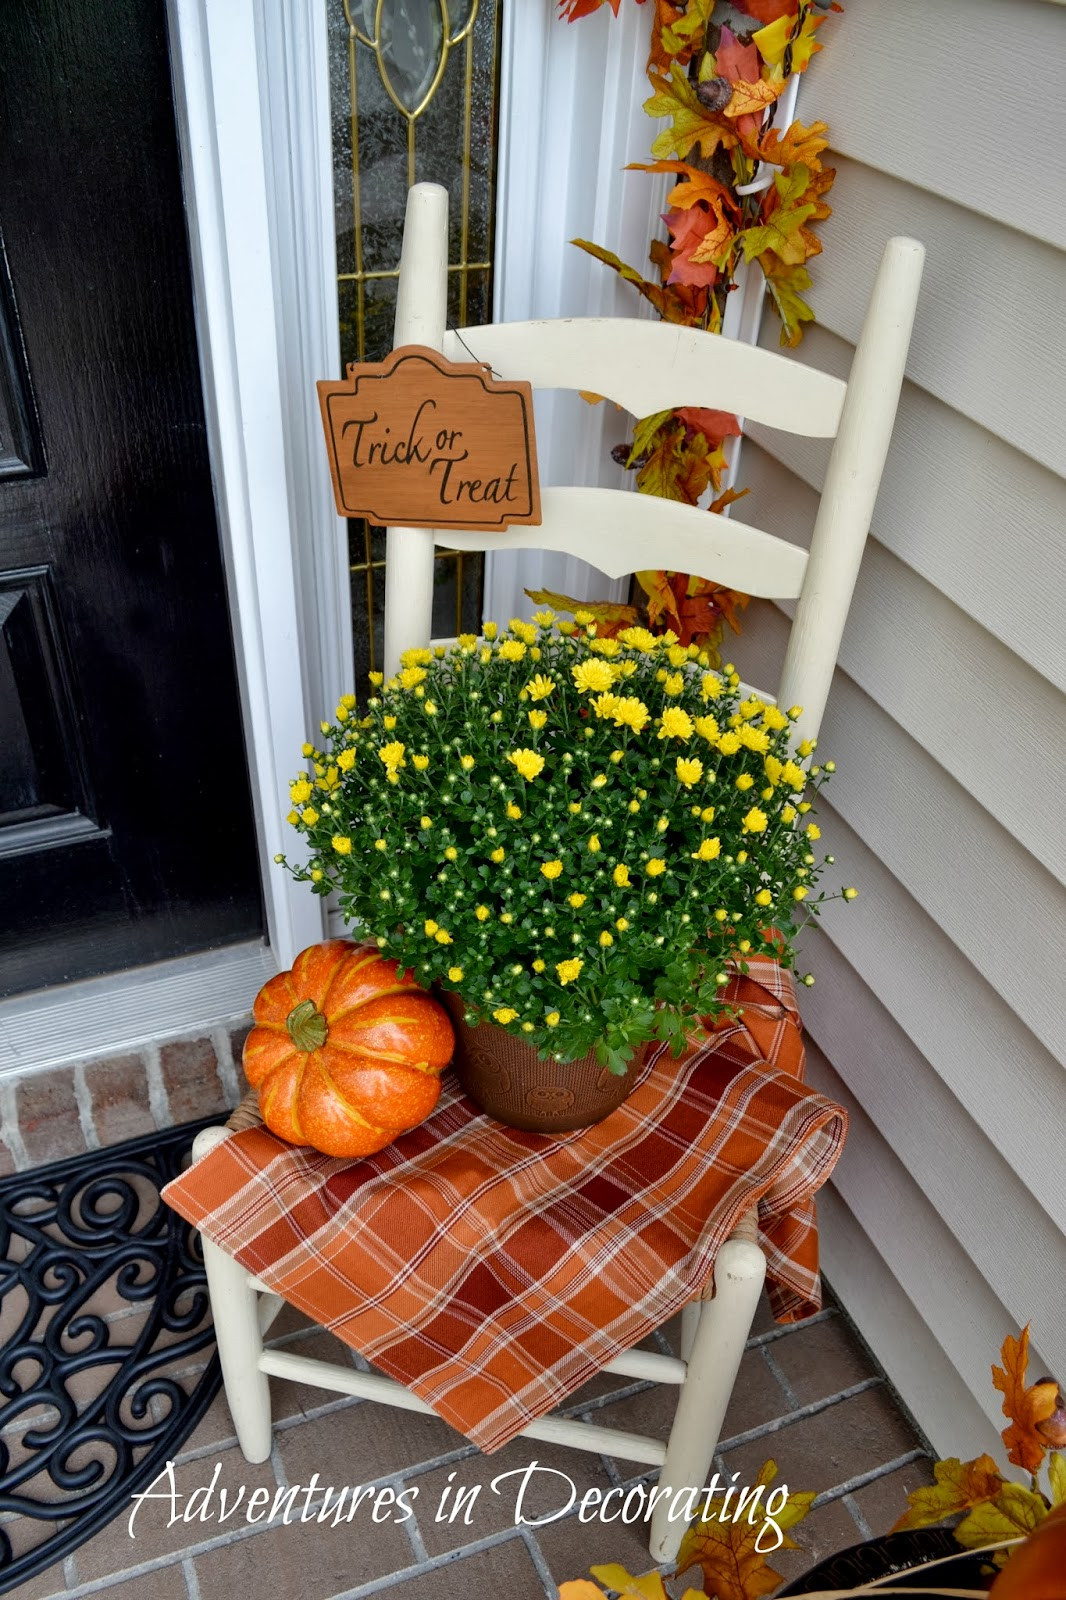 Fall Decorations Porch
 Adventures in Decorating Our Fall Front Porch